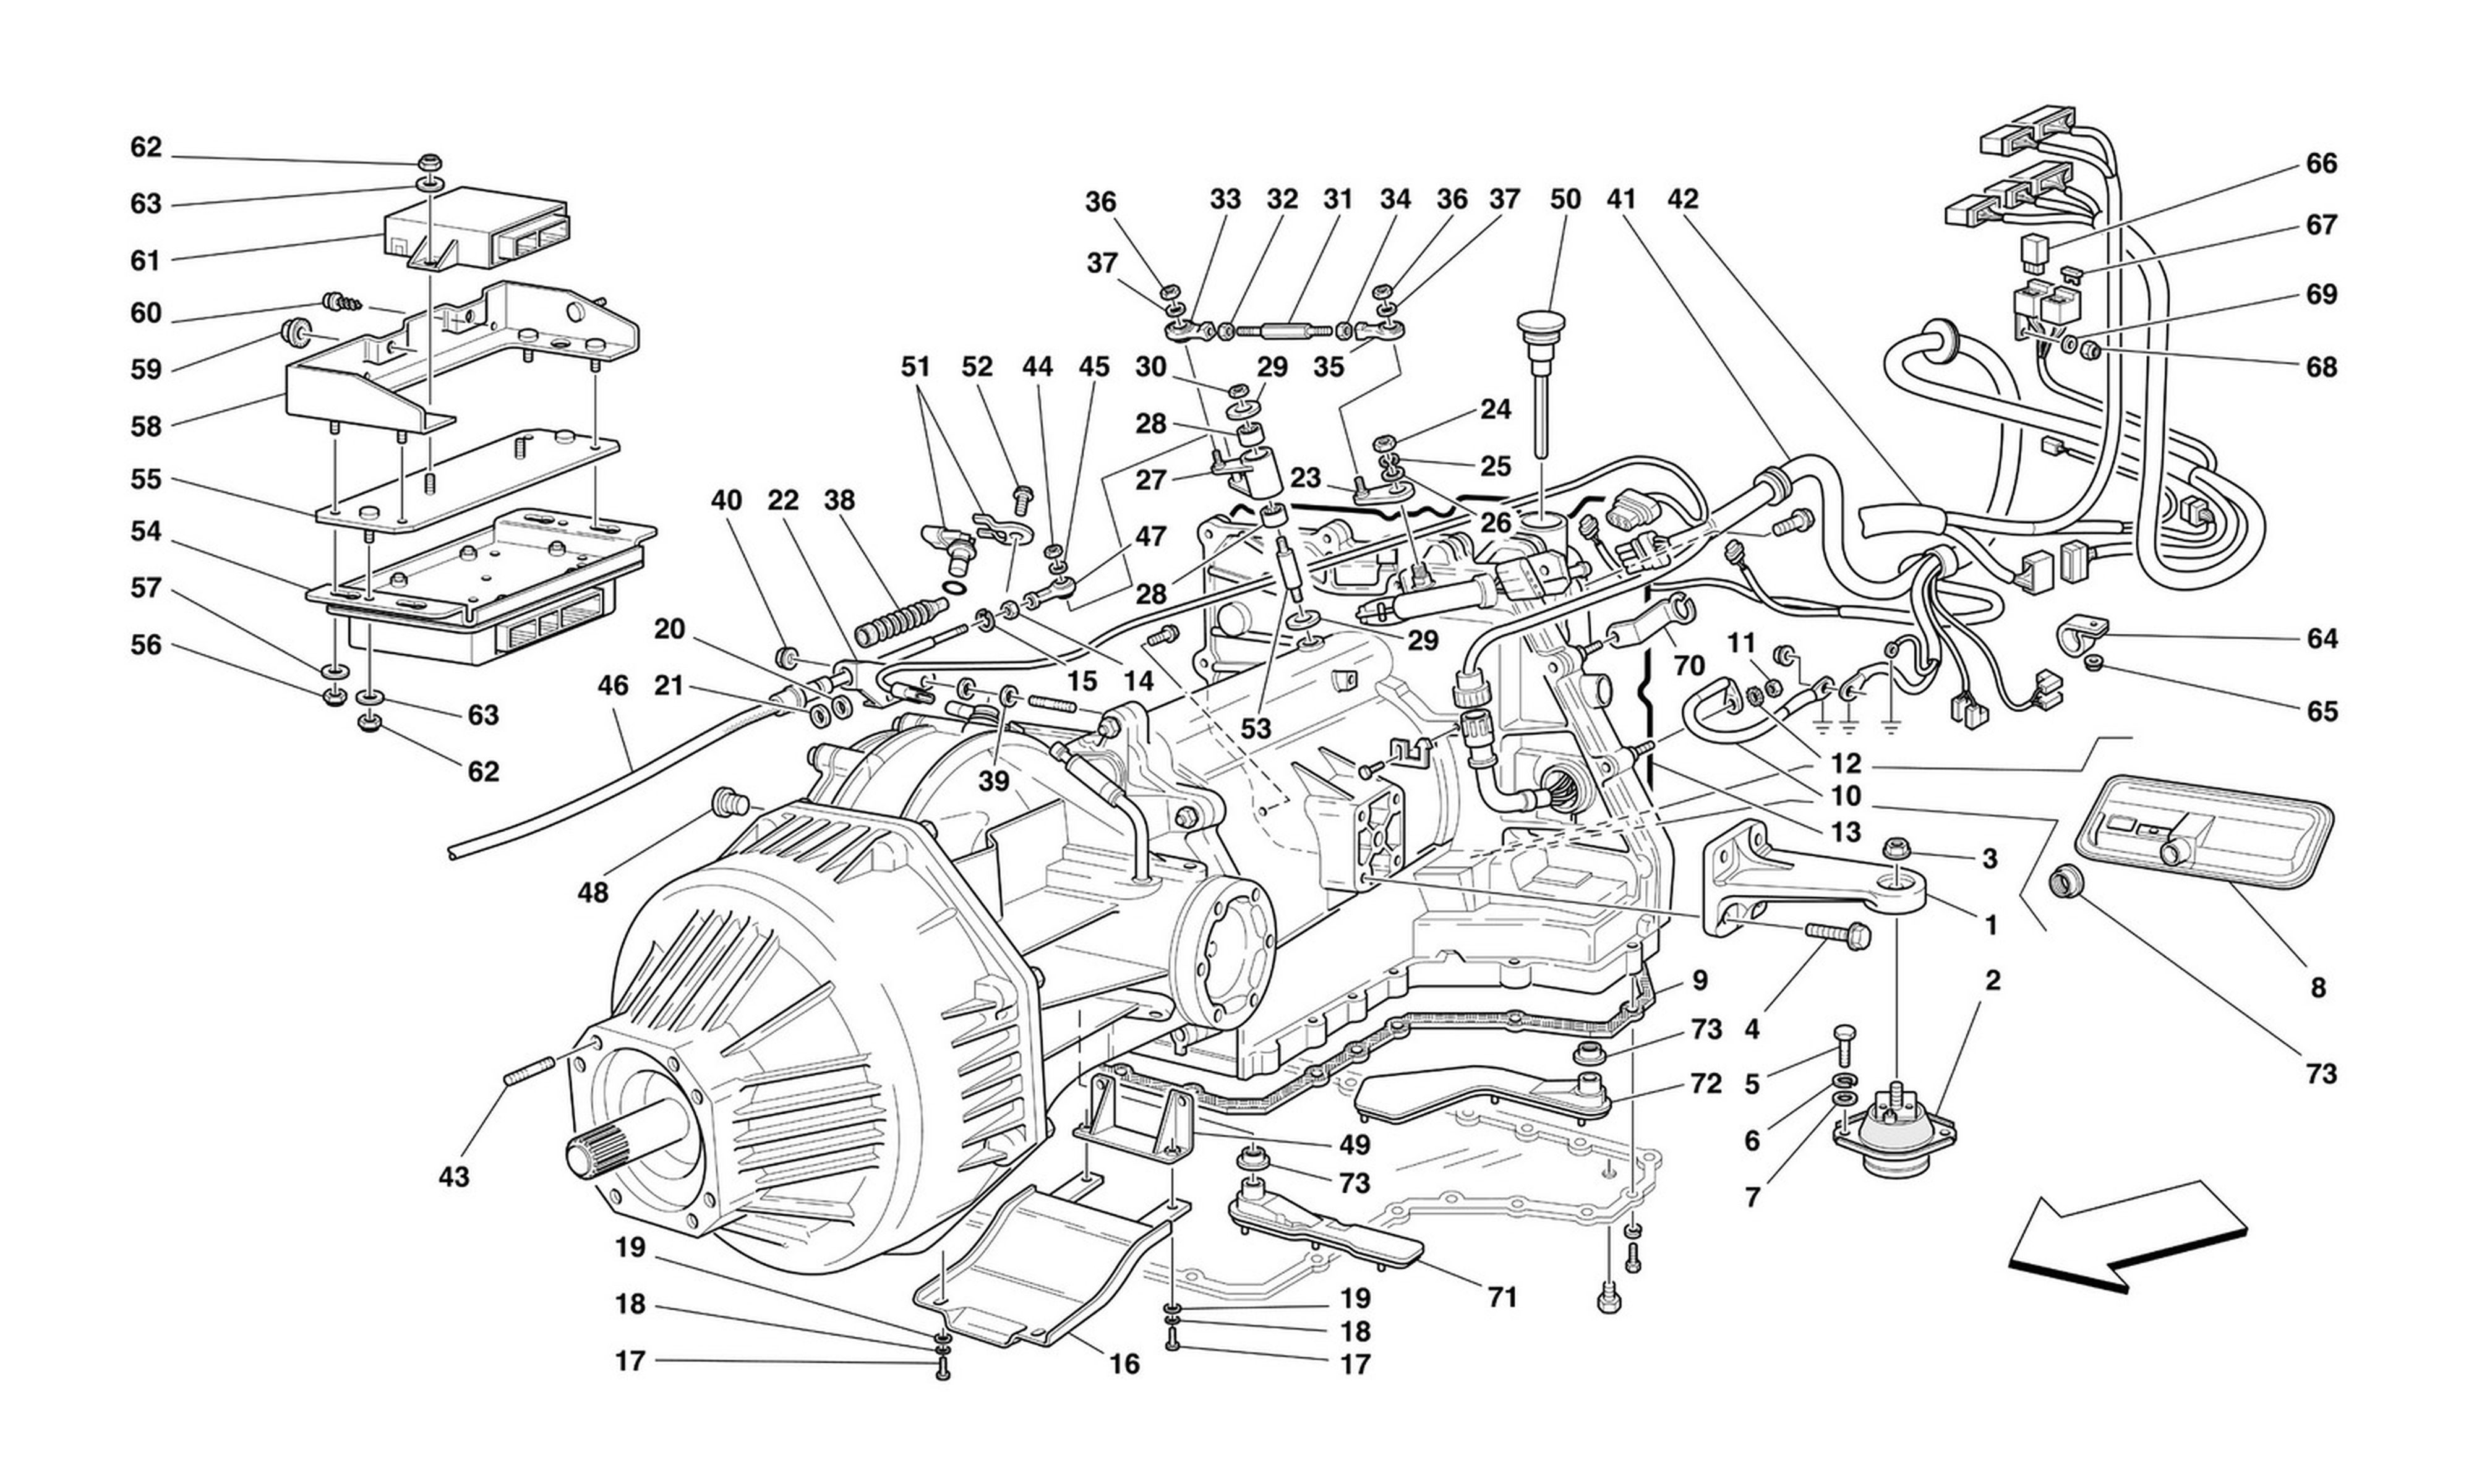 Schematic: Complete Gearbox -Valid For 456Mgta